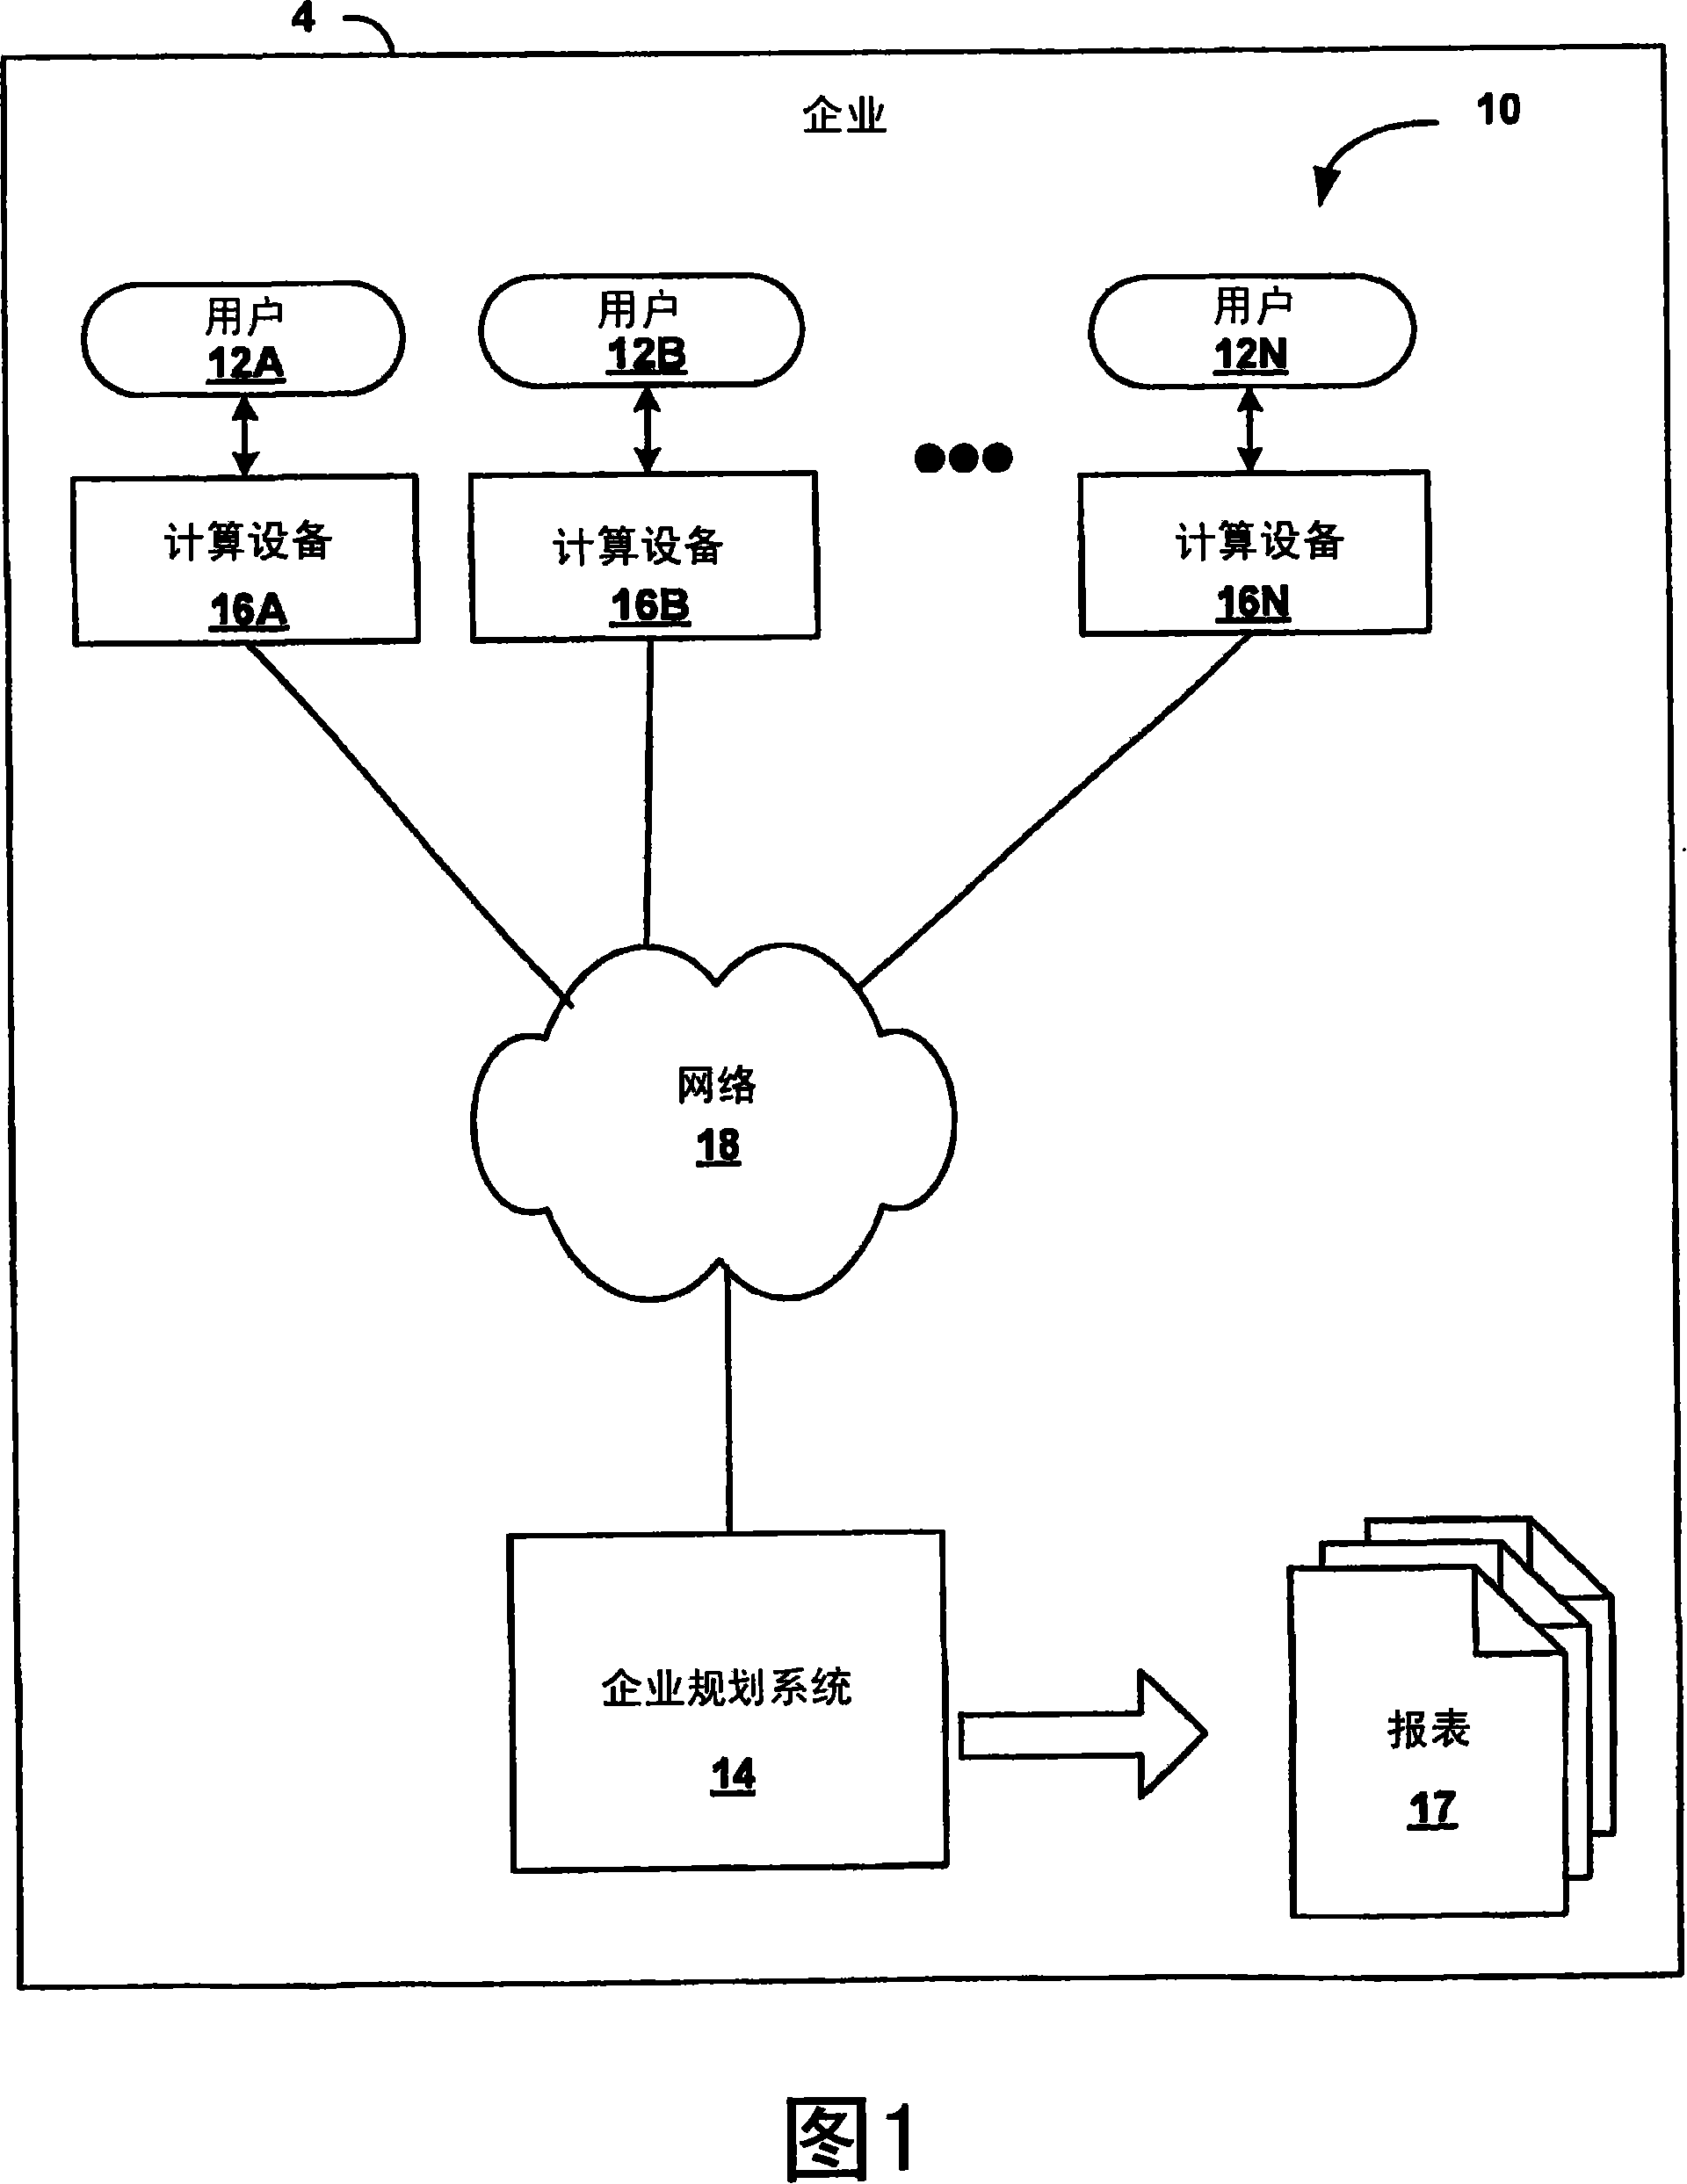 Reporting model generation within a multidimensional enterprise software system